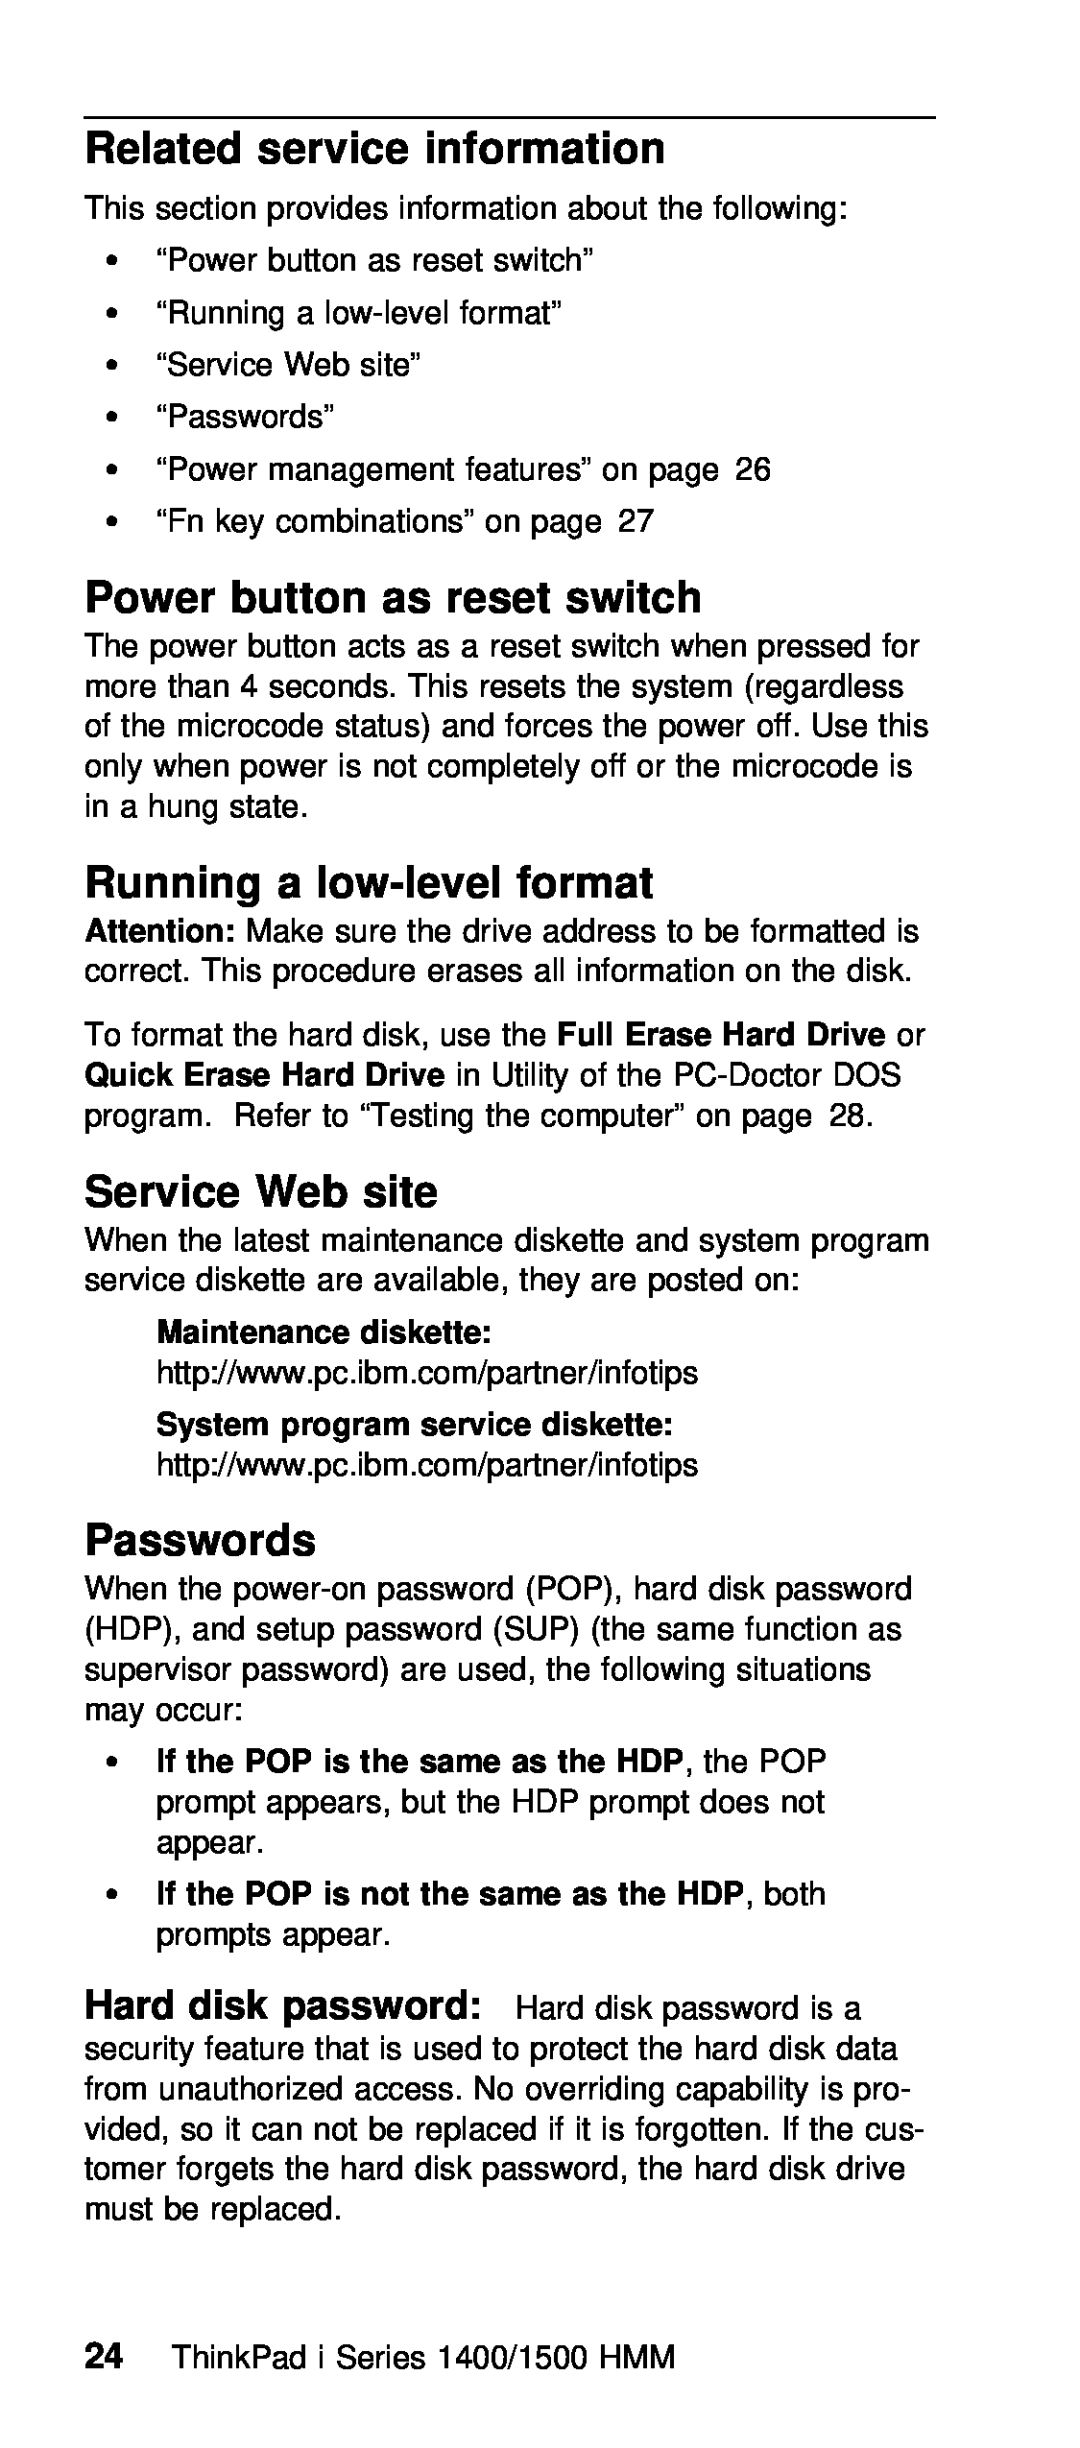 IBM Series 1500 manual Related service information, button, Running a low-level format, Service Web site, Passwords, reset 